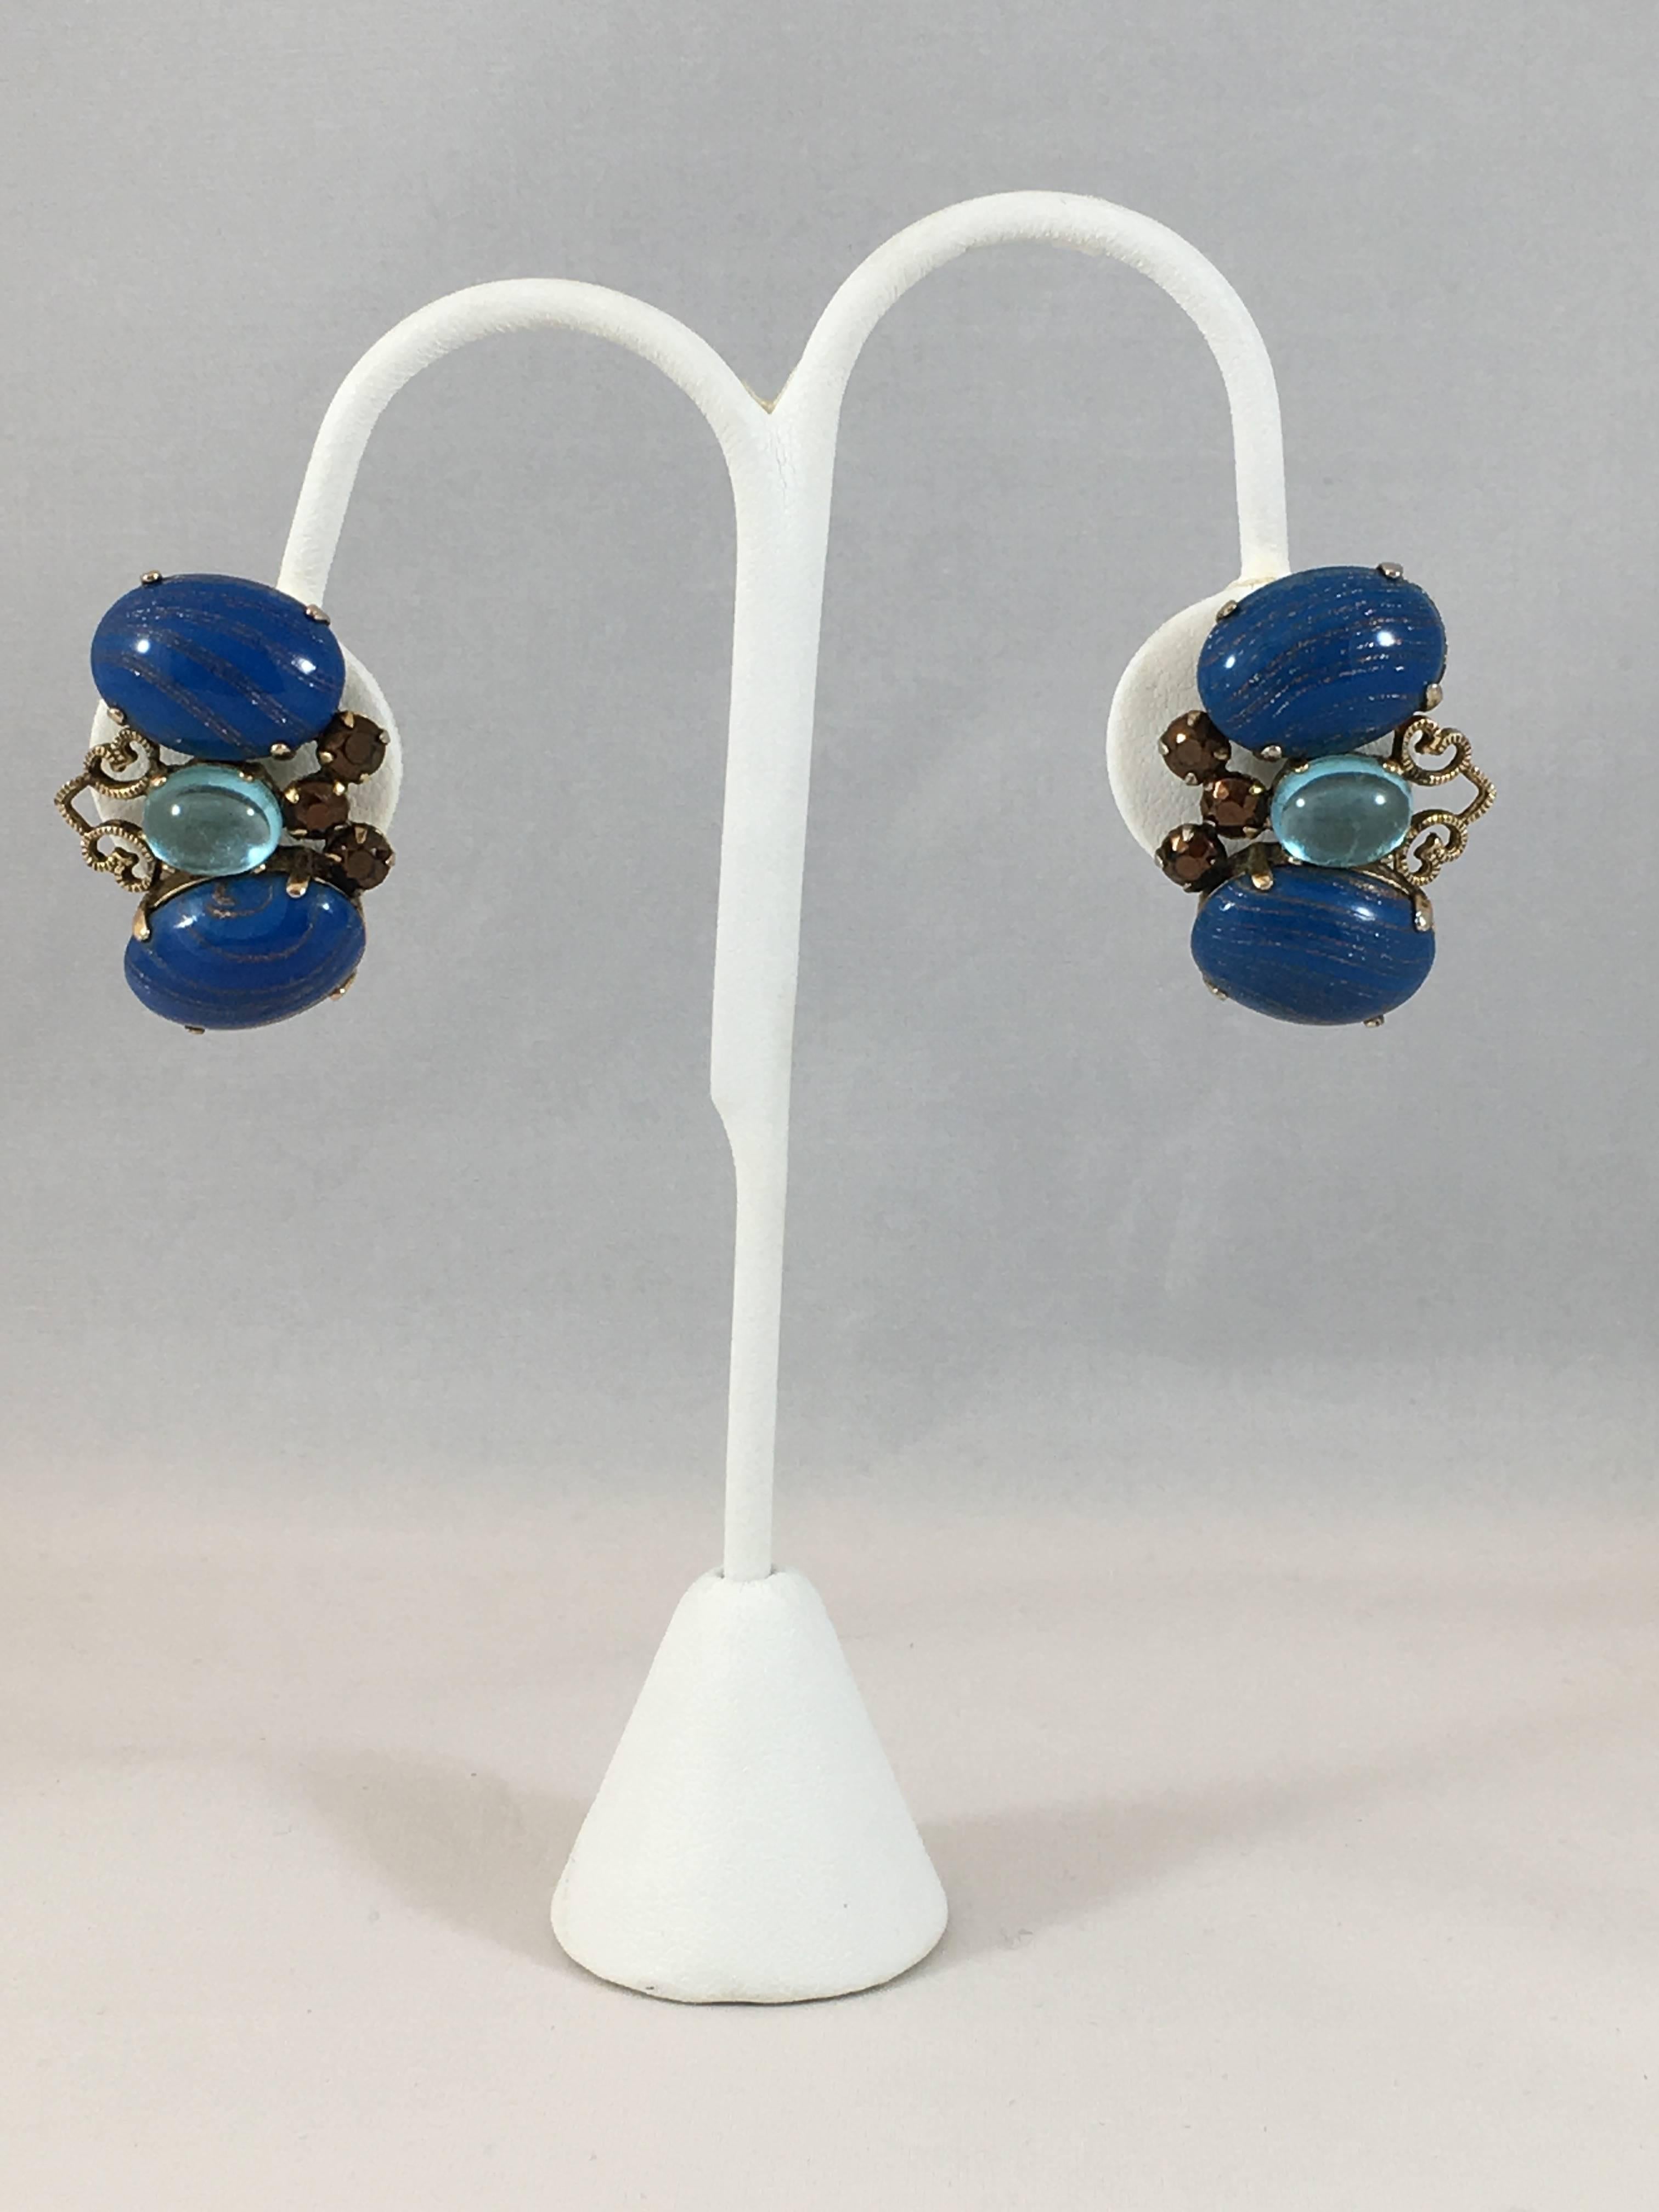 This is a beautiful pair of blue 1960s Schreiner clip-on earrings. They look as if they could be butterflies. They are made out of gold-toned metal set with beautiful blue and brown stones. The smaller brown stones are set with the pointed side up -